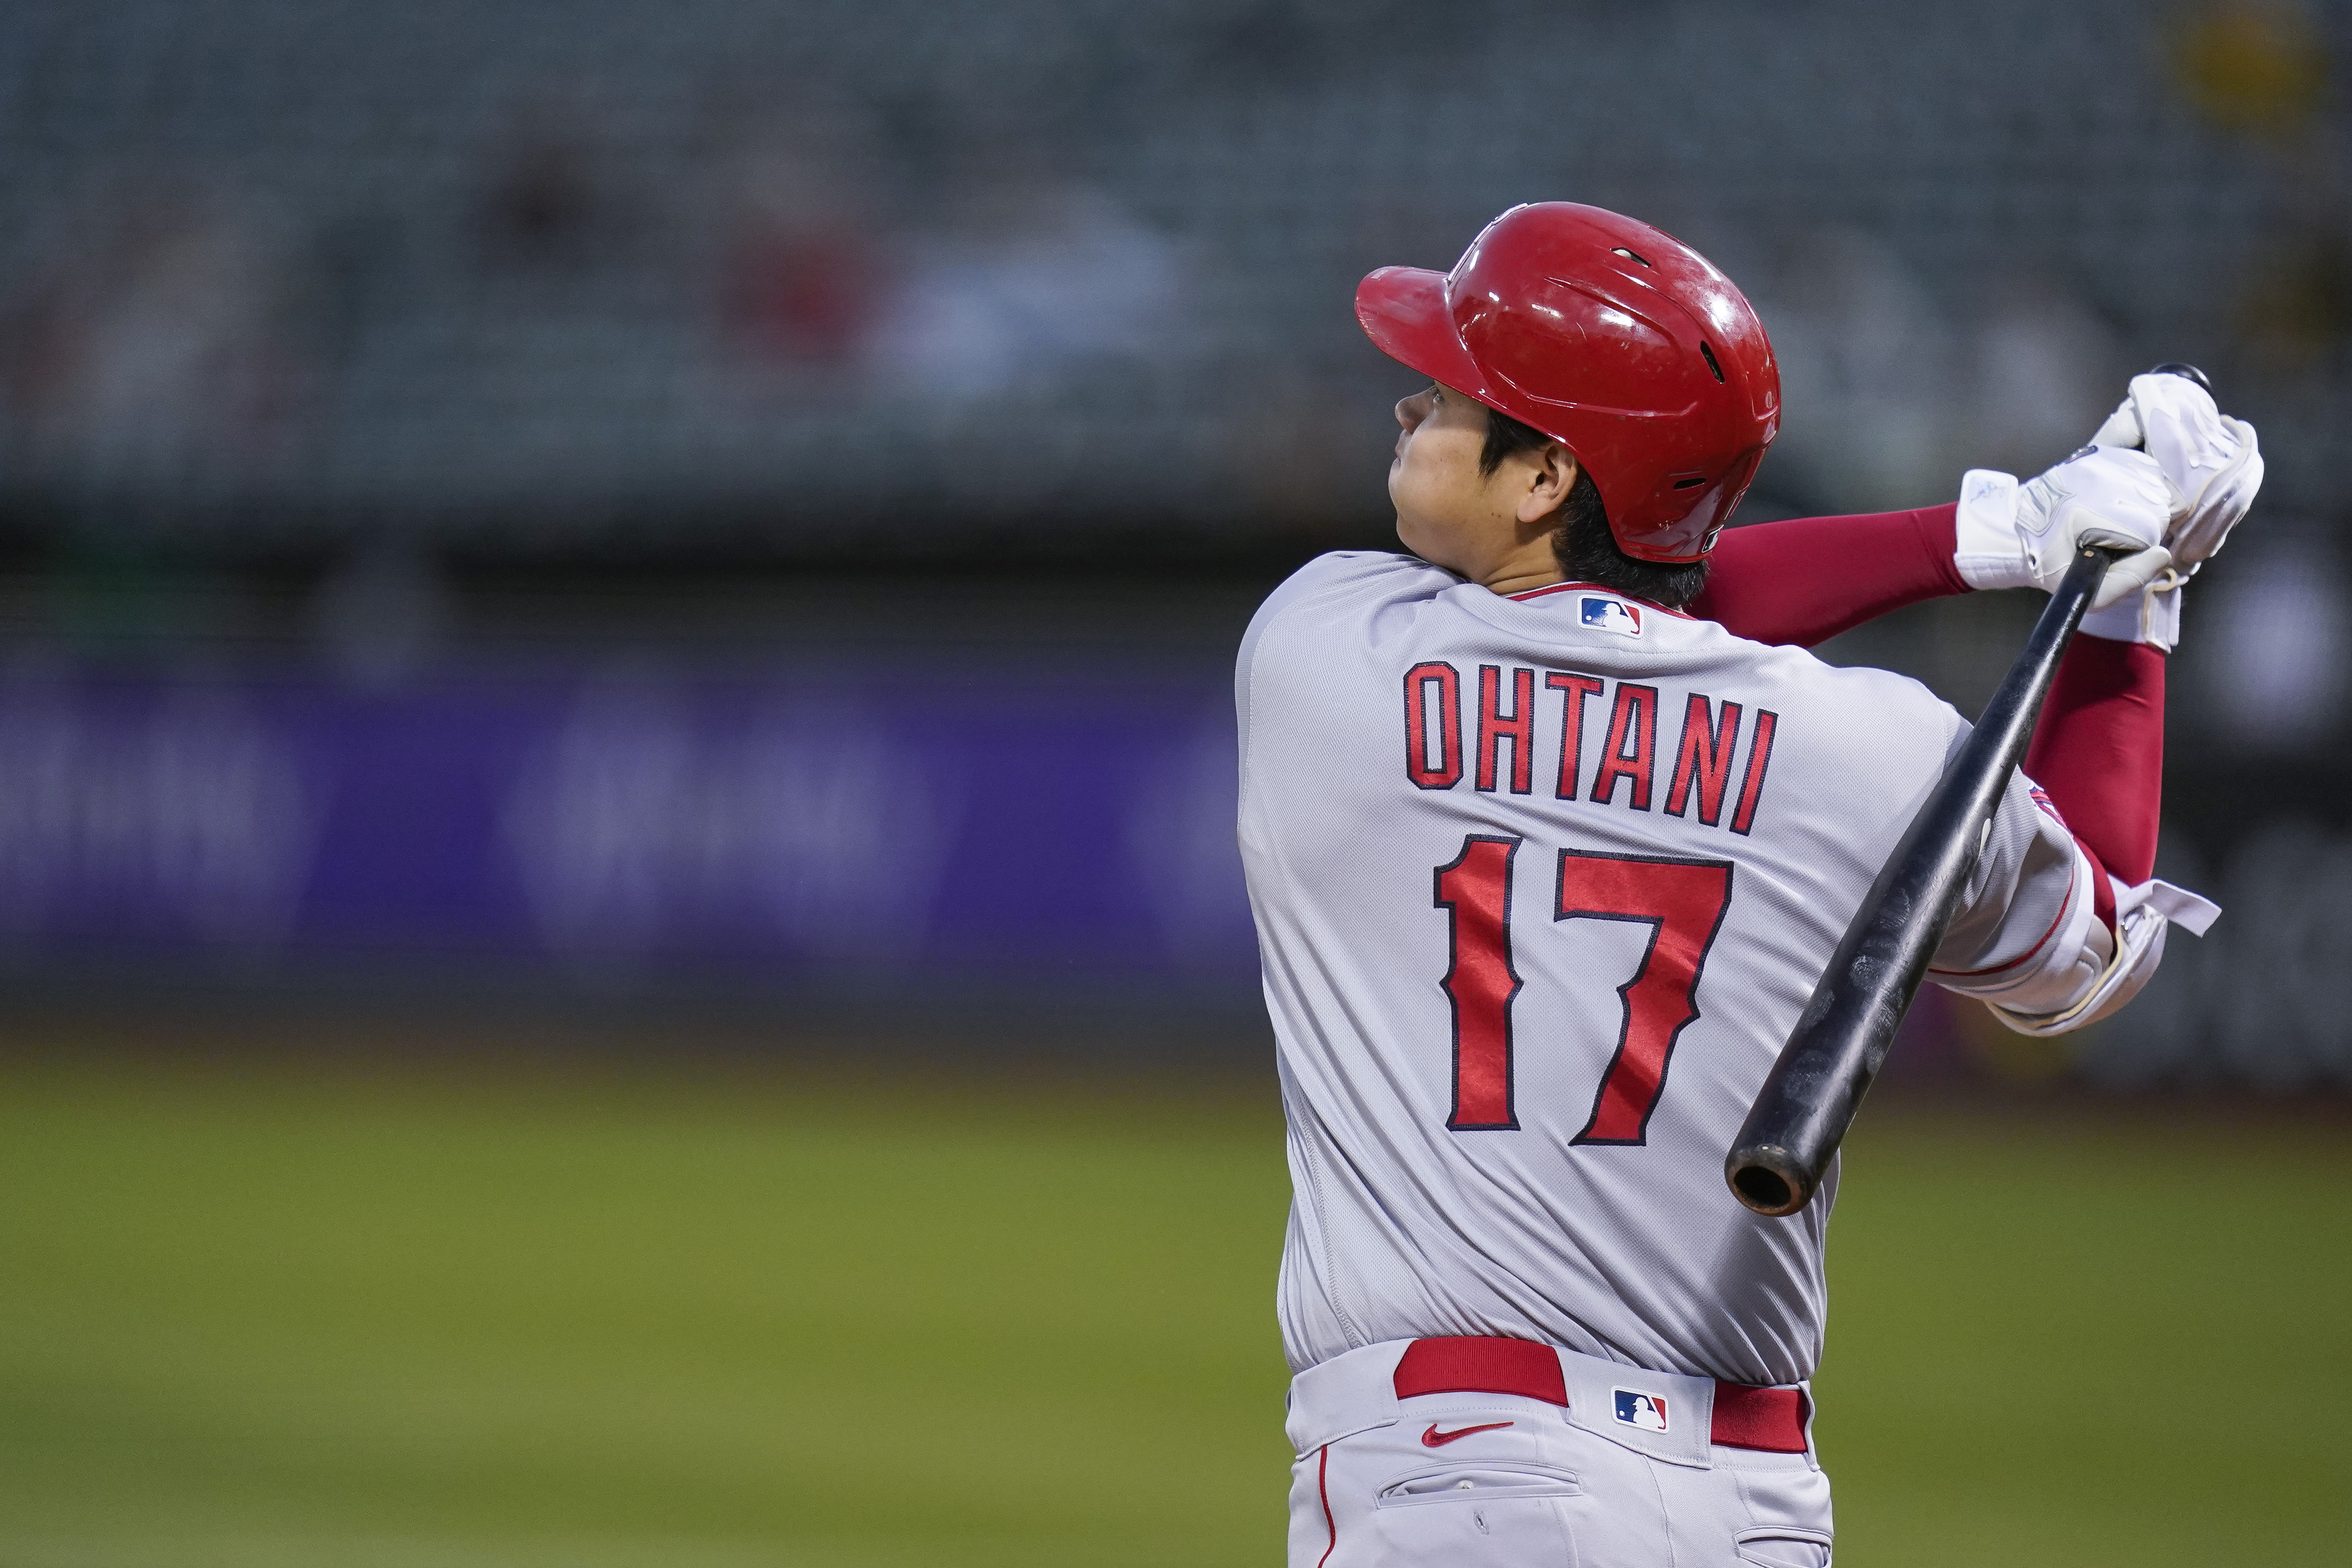 Yankees, Mets get new timeline for Angels-Shohei Ohtani trade talks 